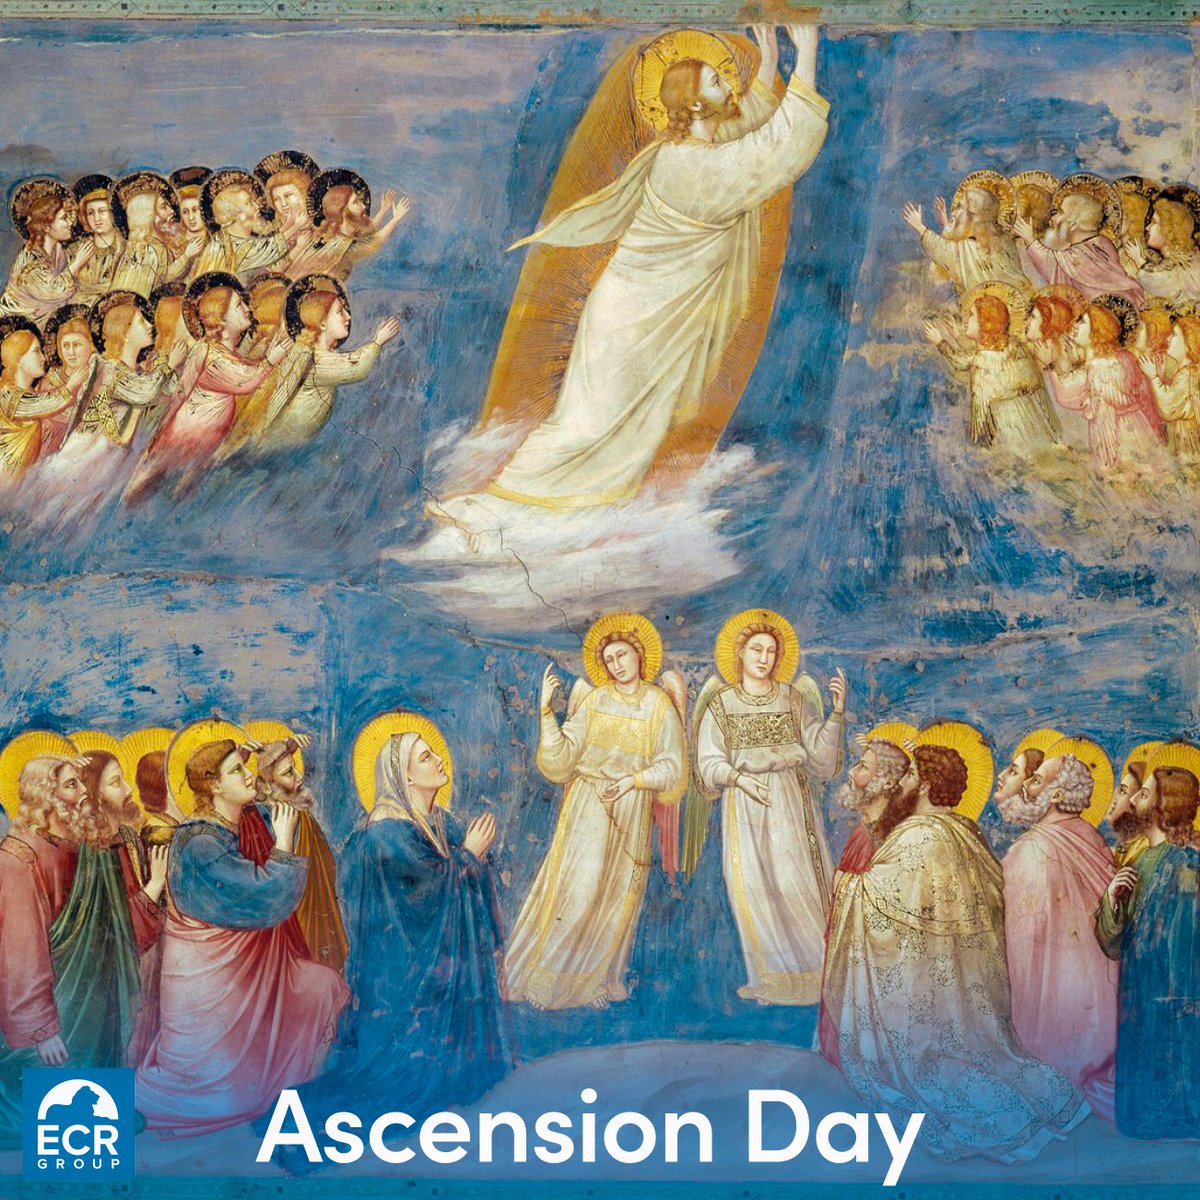 As we commemorate Ascension Day, let's reflect on the profound significance of Christ's ascension, symbolising triumph over death. May this day renew faith and inspire al to follow His example of love and compassion. #AscensionDay